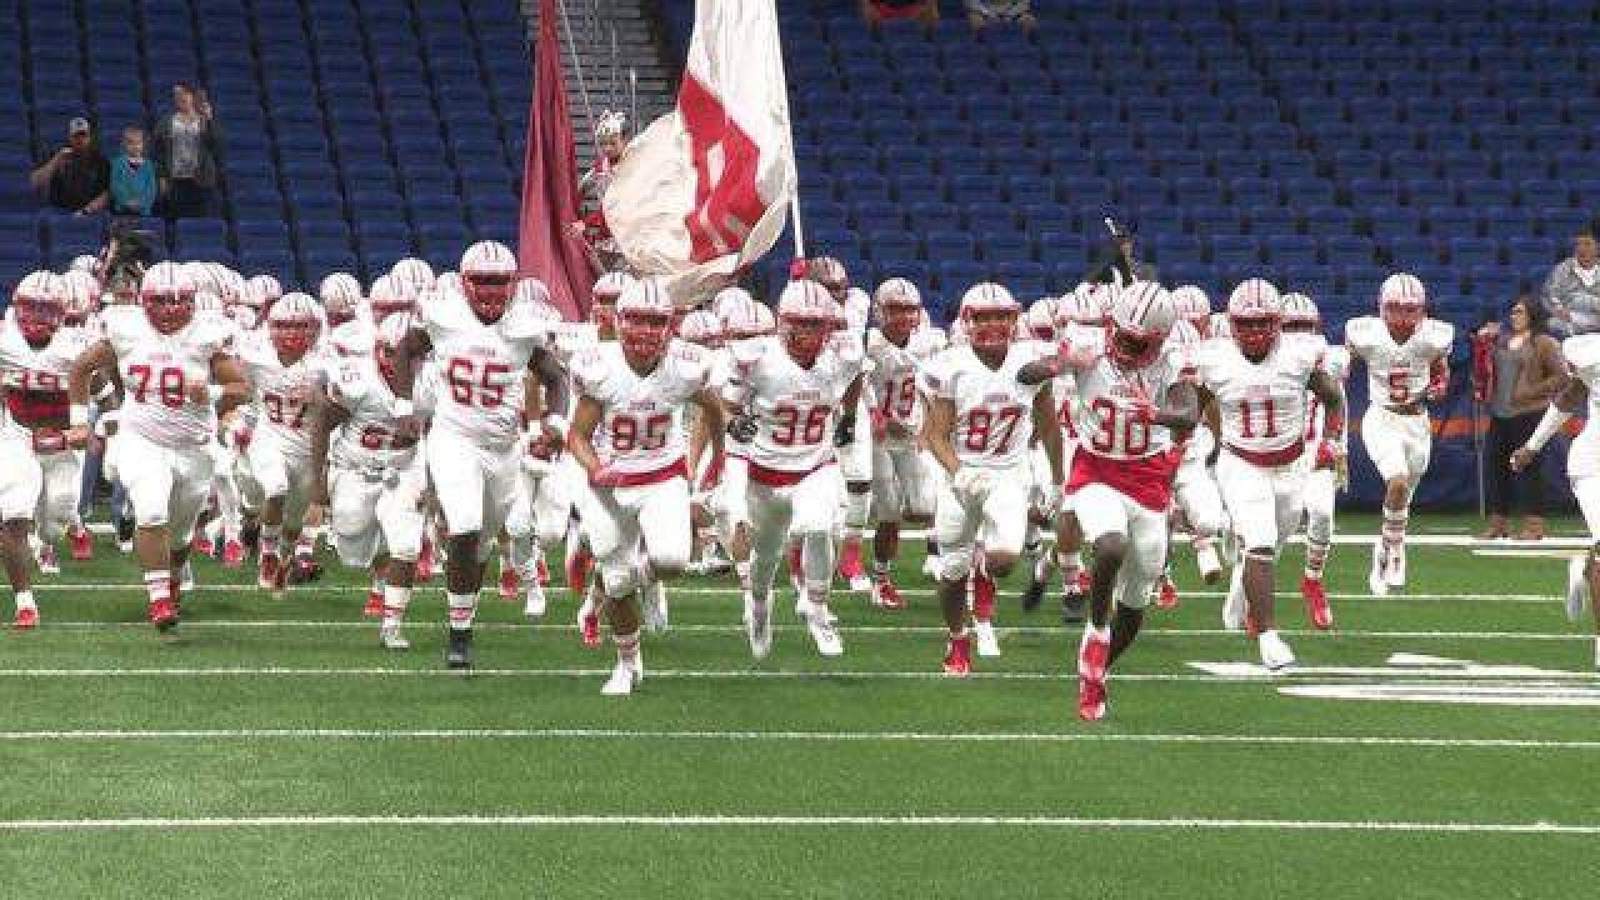 Friday’s game canceled between Judson, Smithson Valley due to COVID-19